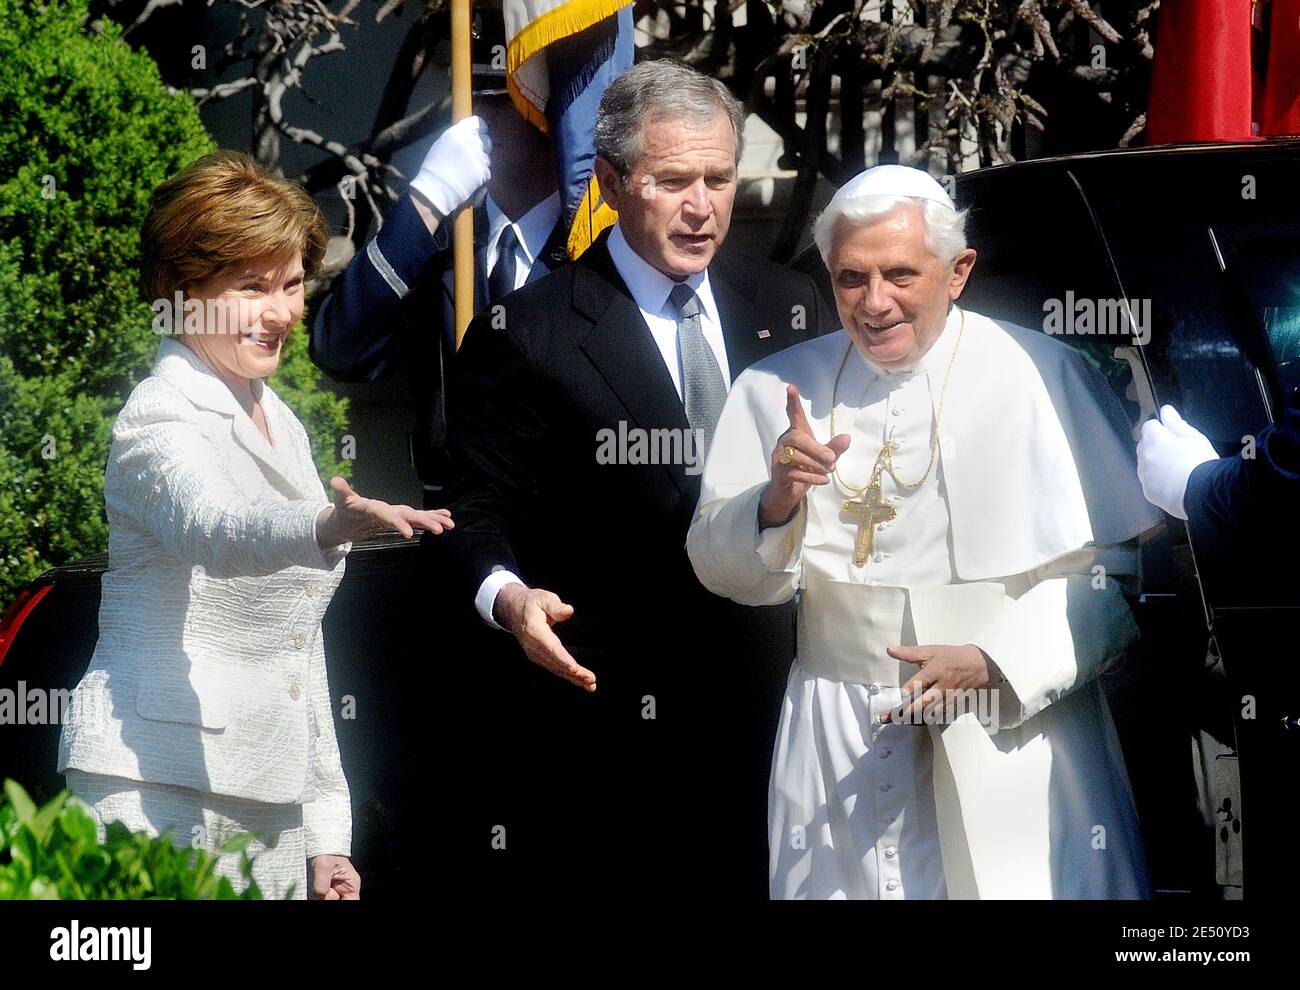 US President George W. Bush and his wife, First Lady Laura Bush greet Pope Benedict XVI as he arrives at the White House April 16, 2008 in Washington, DC, USA. Photo by Olivier Douliery /ABACAPRESS.COM Stock Photo